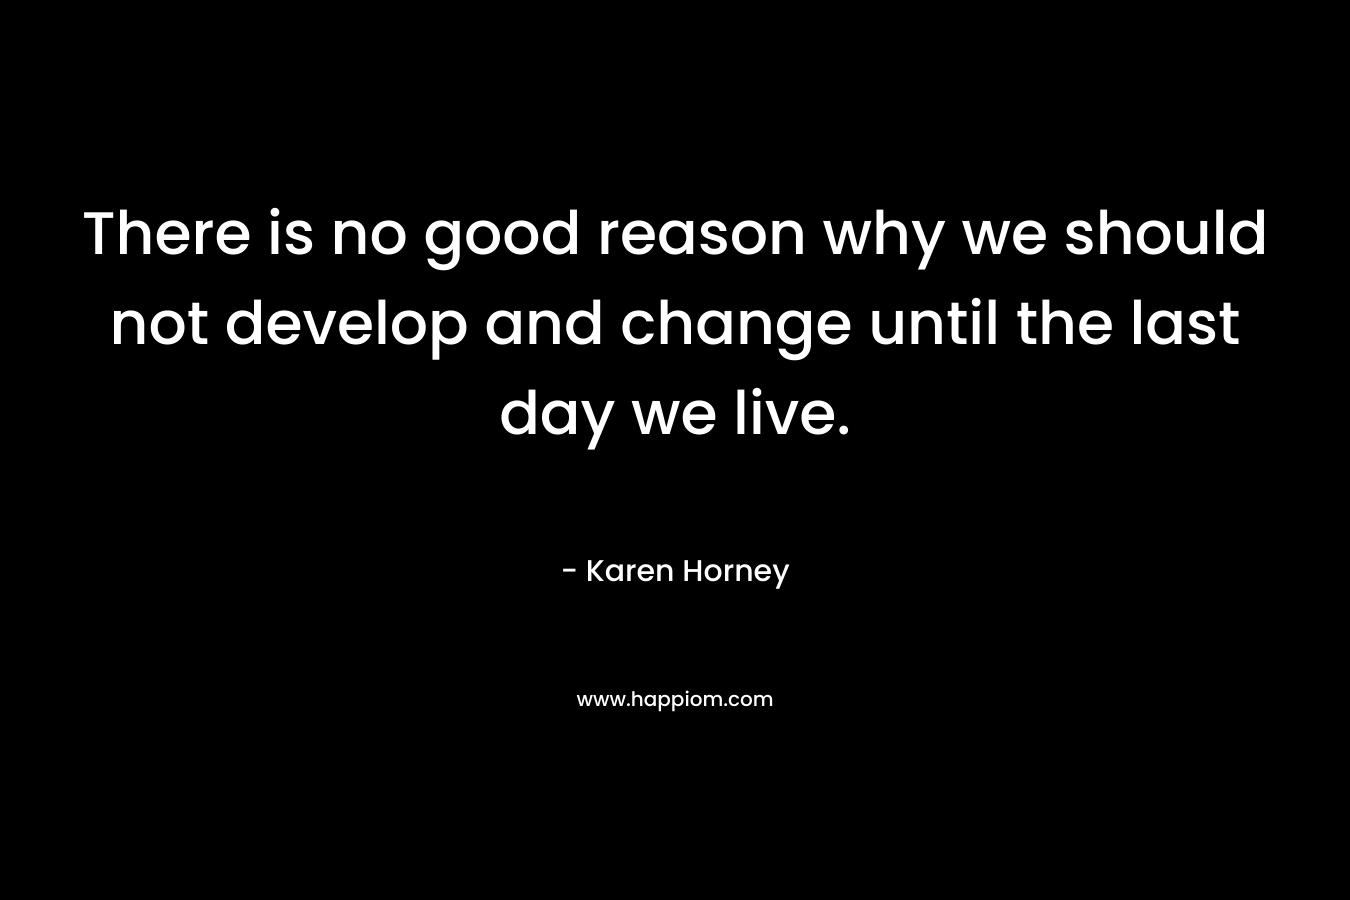 There is no good reason why we should not develop and change until the last day we live.